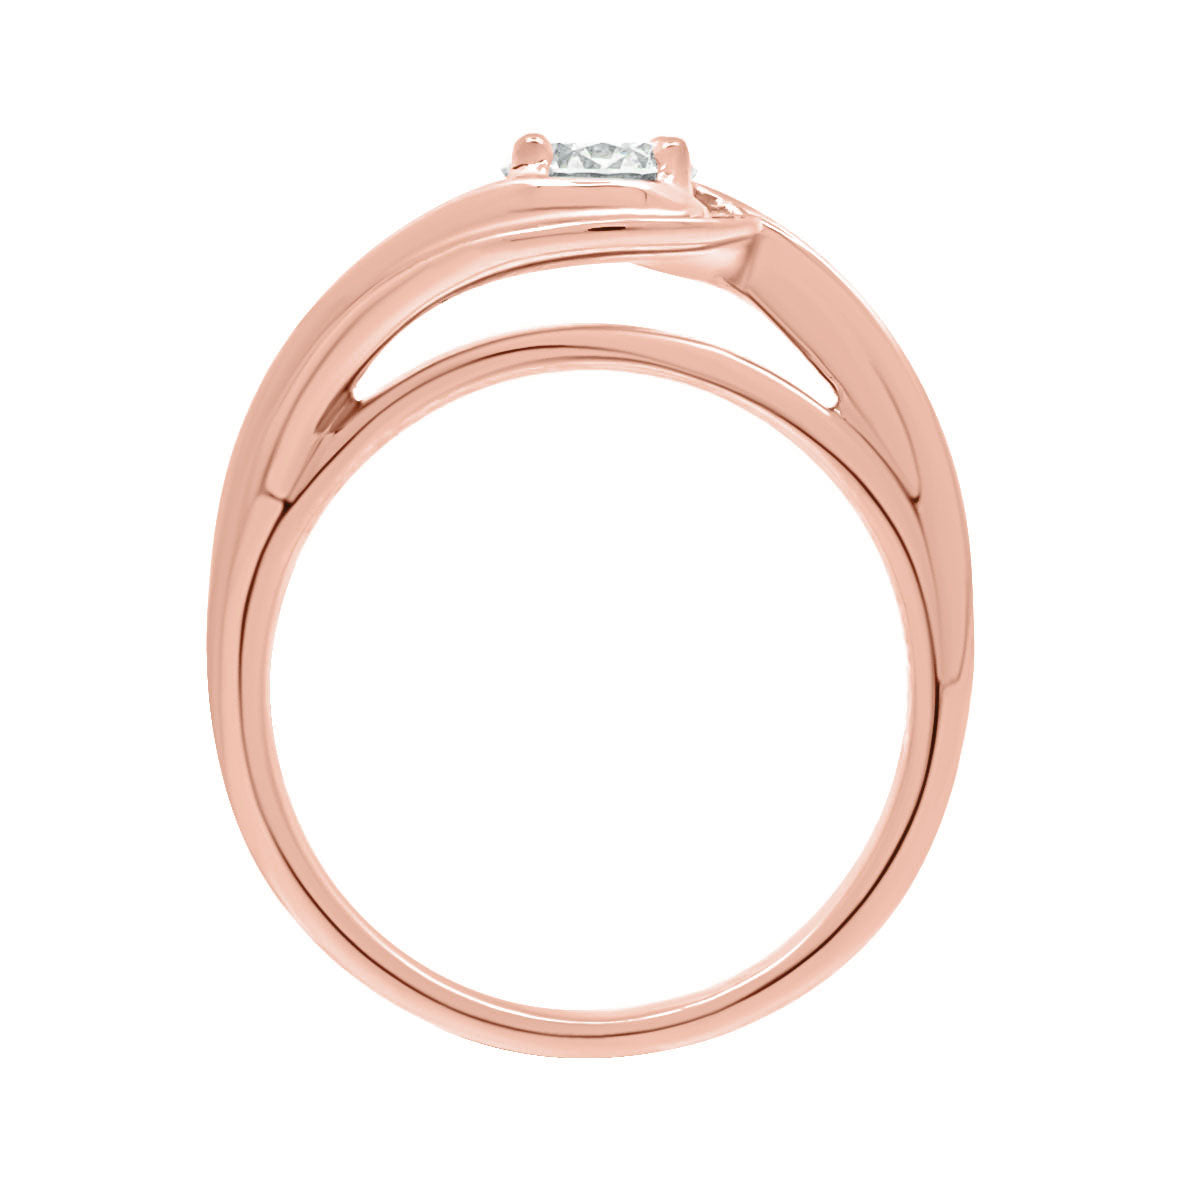 Contemporary Style Engagement Ring in  rose gold, standing verticl, with a white background.